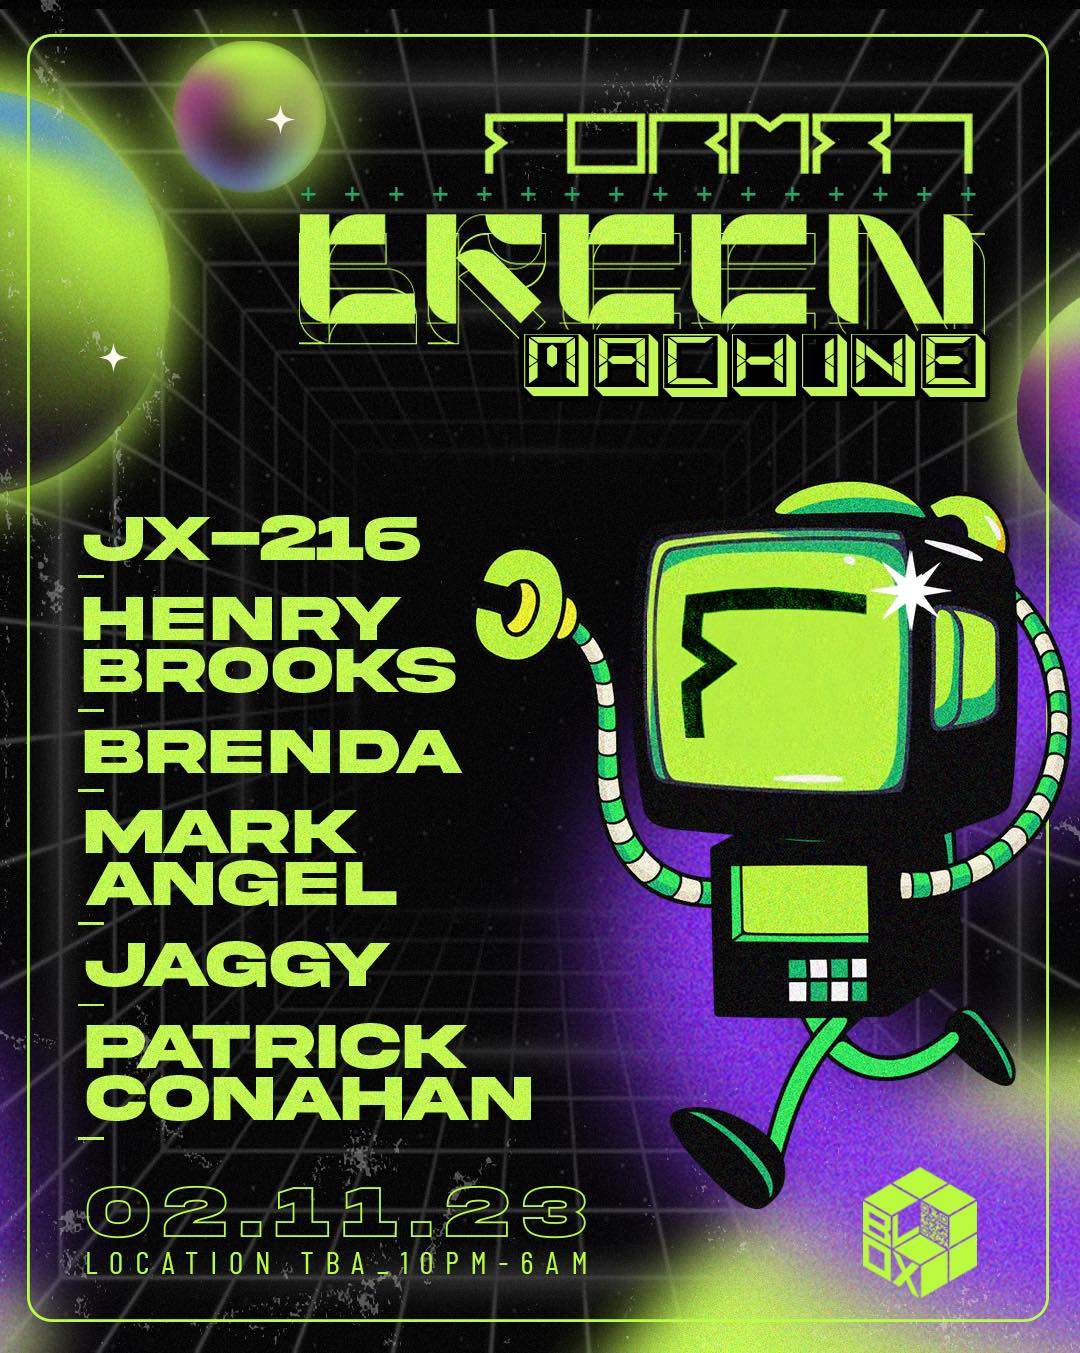 Green Machine x Format with JX-216 / Henry Brooks / Brenda / Mark Angel / Jaggy / Pat Conahan - フライヤー表